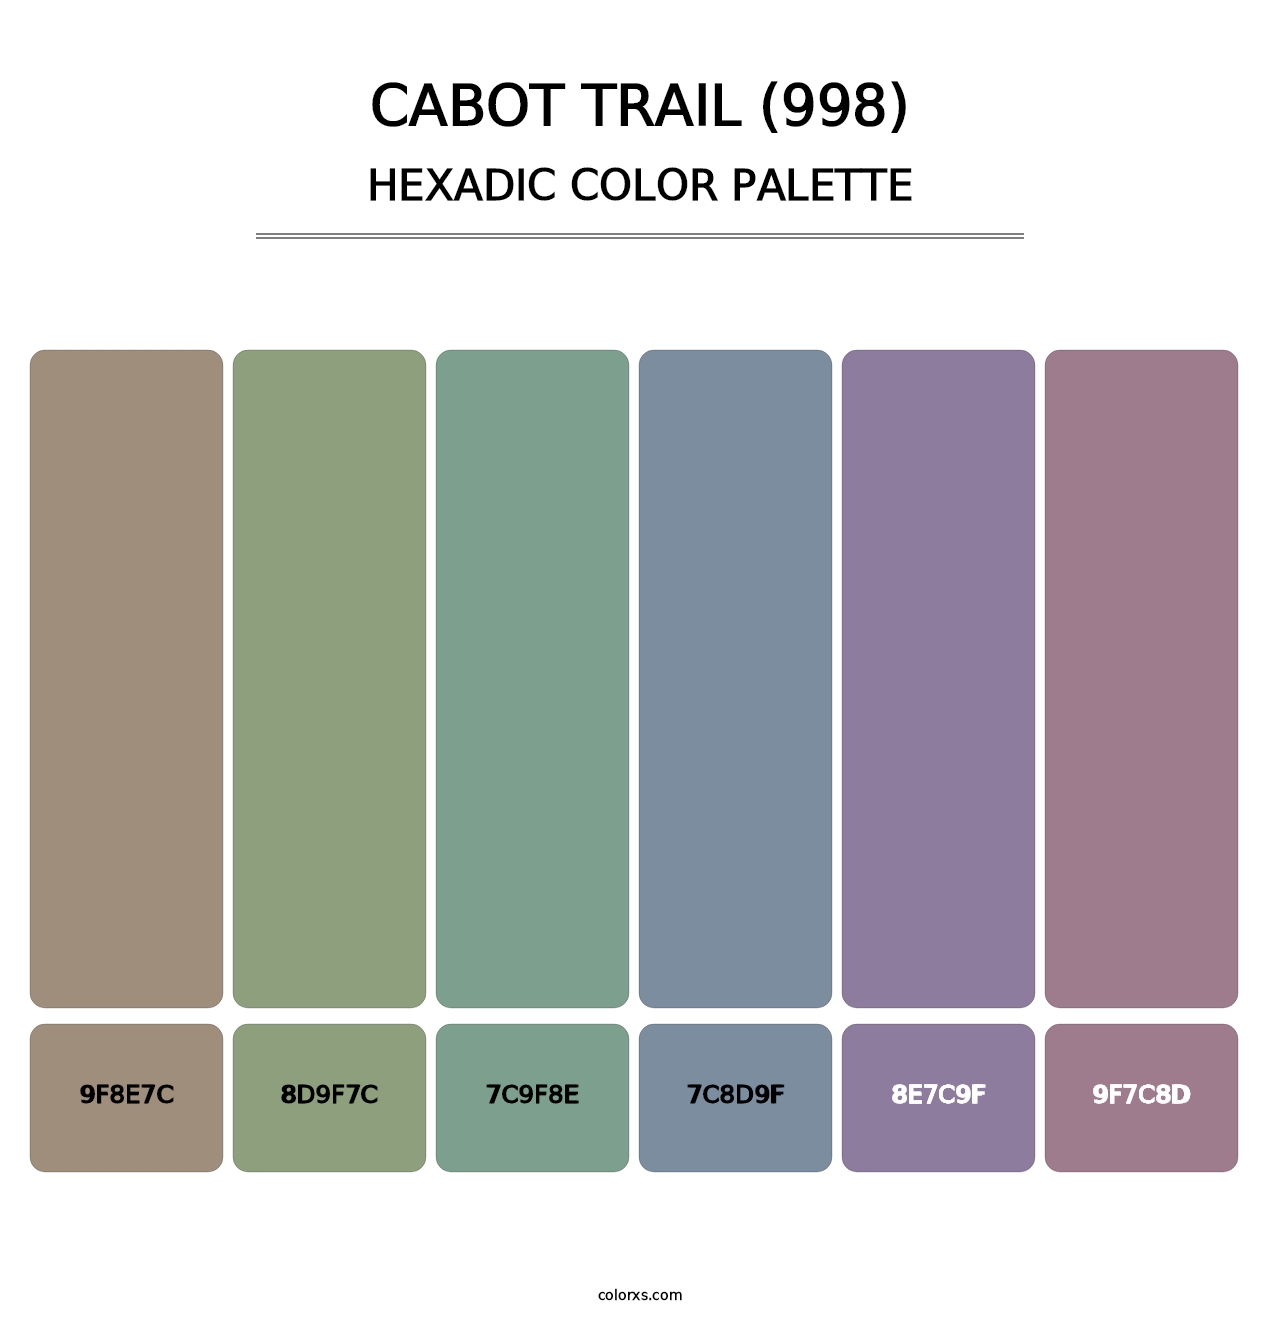 Cabot Trail (998) - Hexadic Color Palette